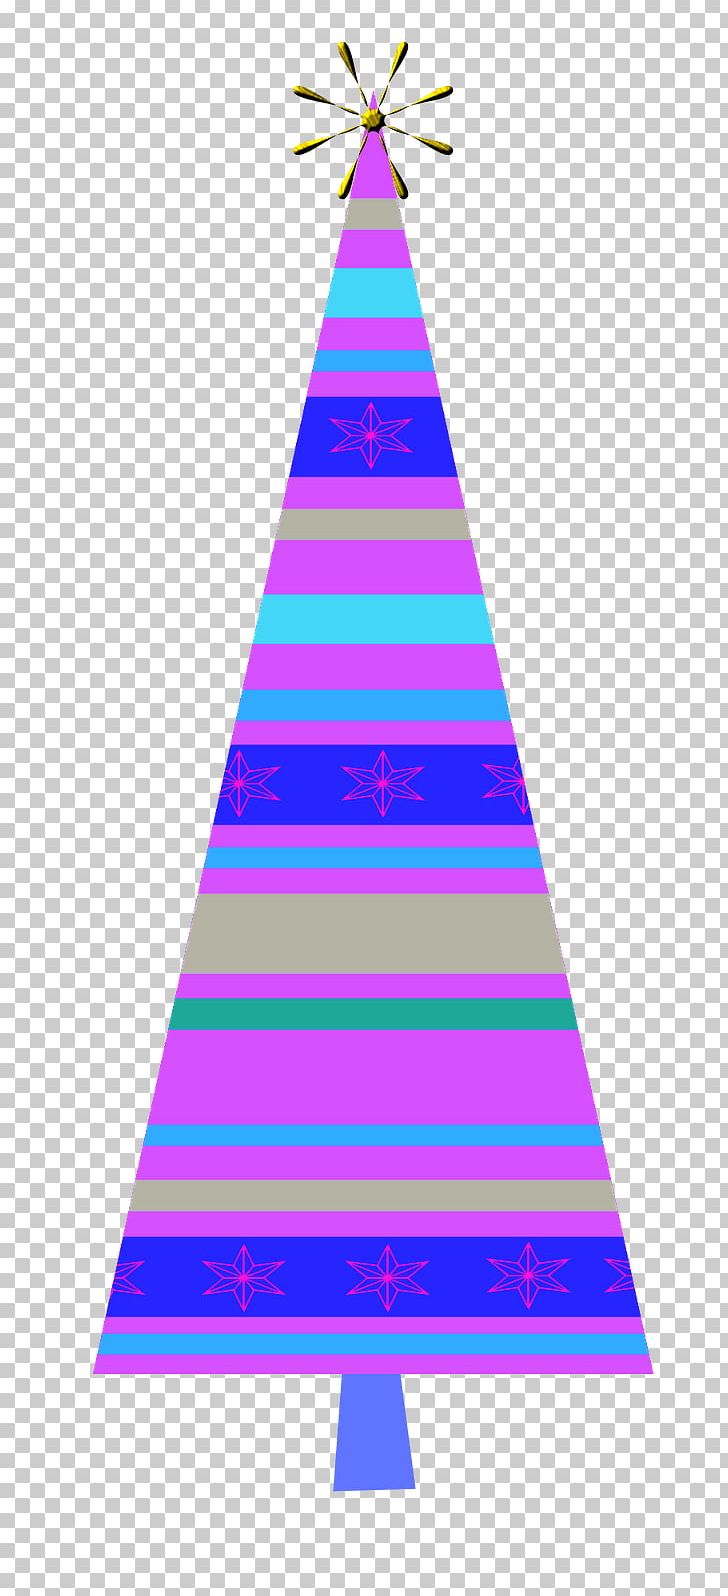 Christmas Tree Triangle Diagram PNG, Clipart, Area, Christmas, Christmas Decoration, Christmas Tree, Cone Free PNG Download